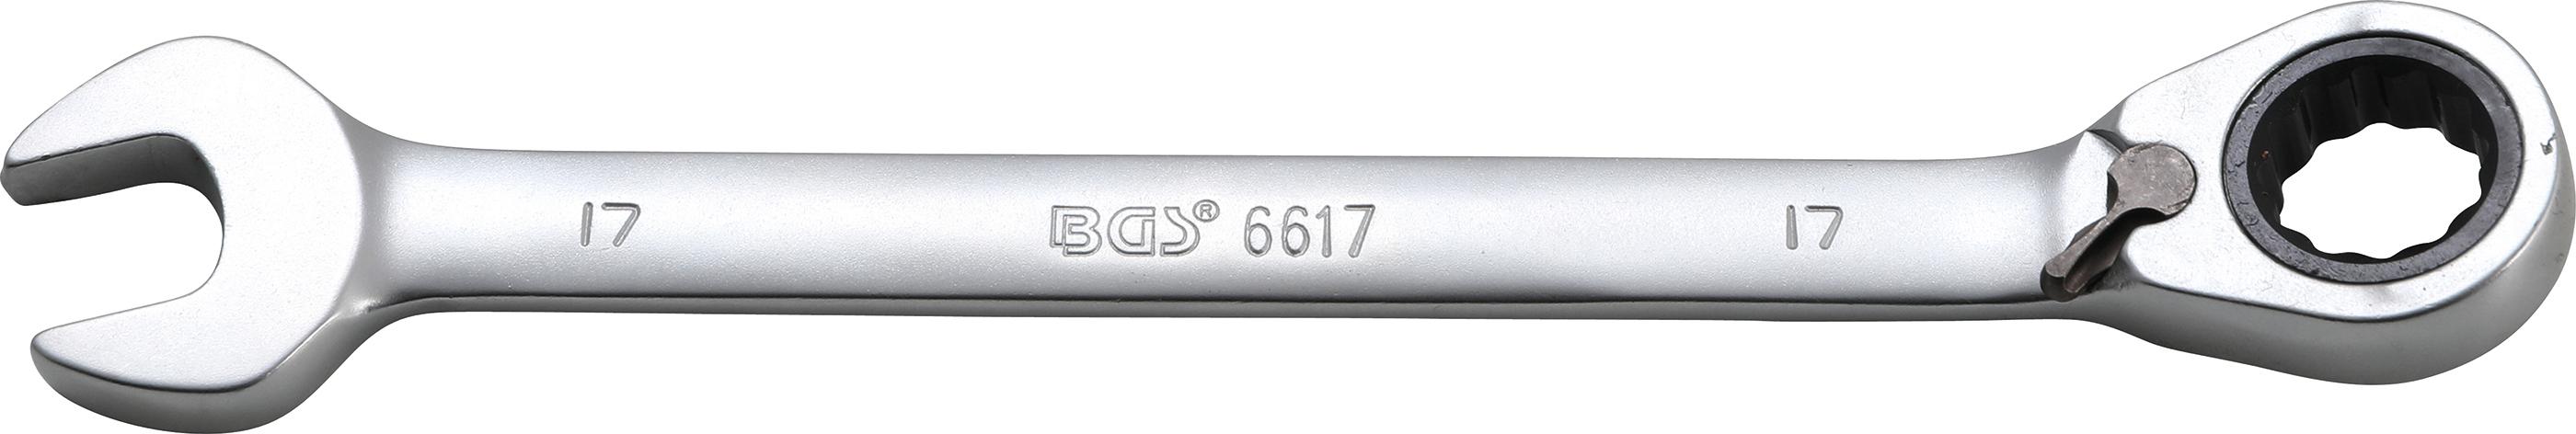 Ratchet Combination Wrench | reversible | 17 mm (6617)